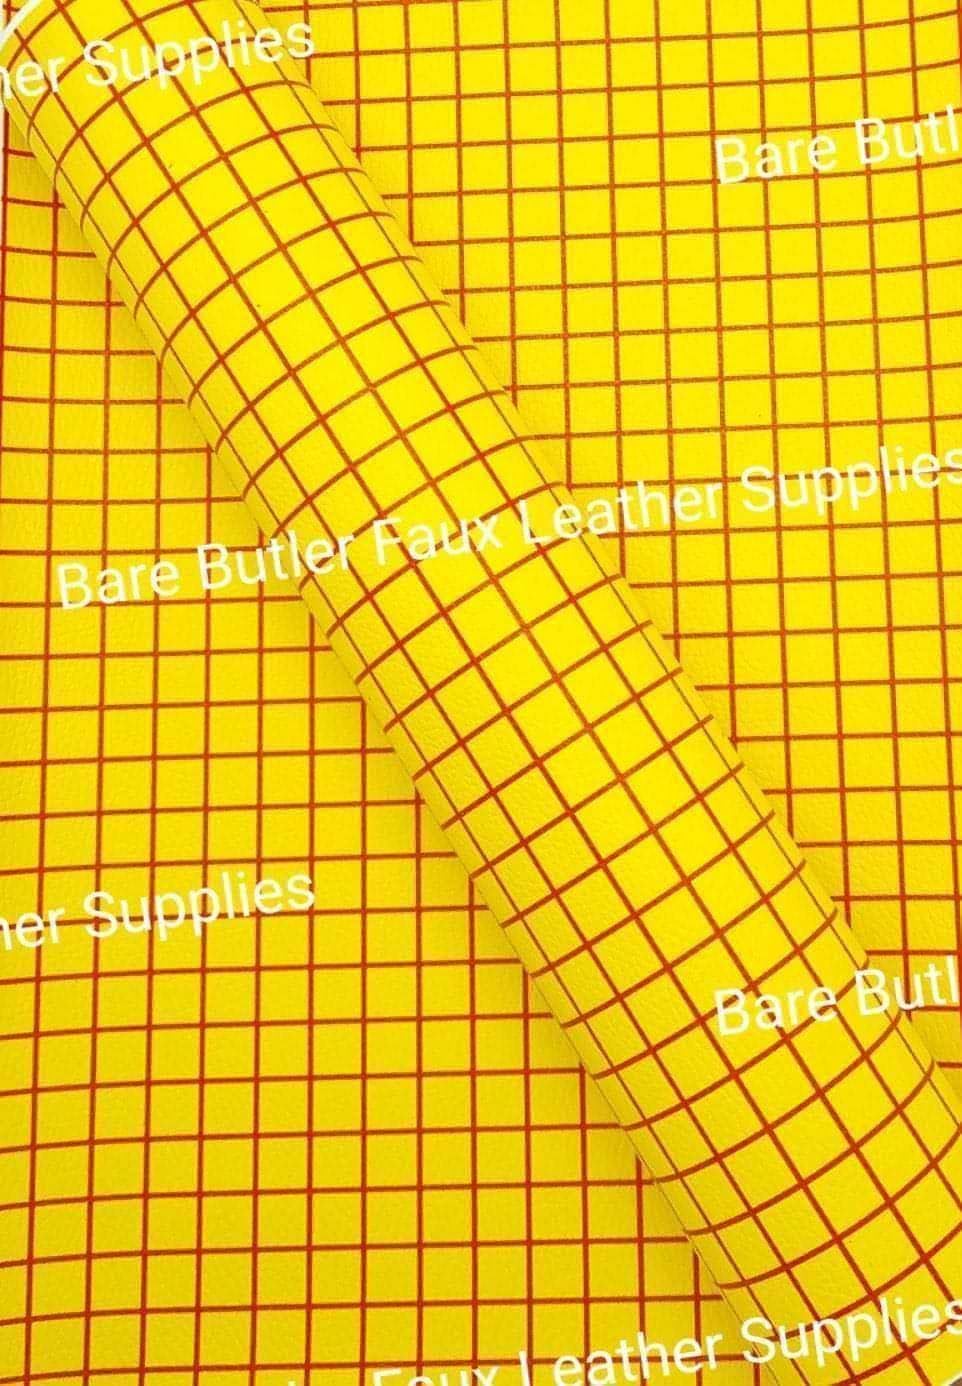 Red & Yellow Checks Litchi - Faux, Faux Leather, Leather, leatherette, sherif, toy story, woody - Bare Butler Faux Leather Supplies 